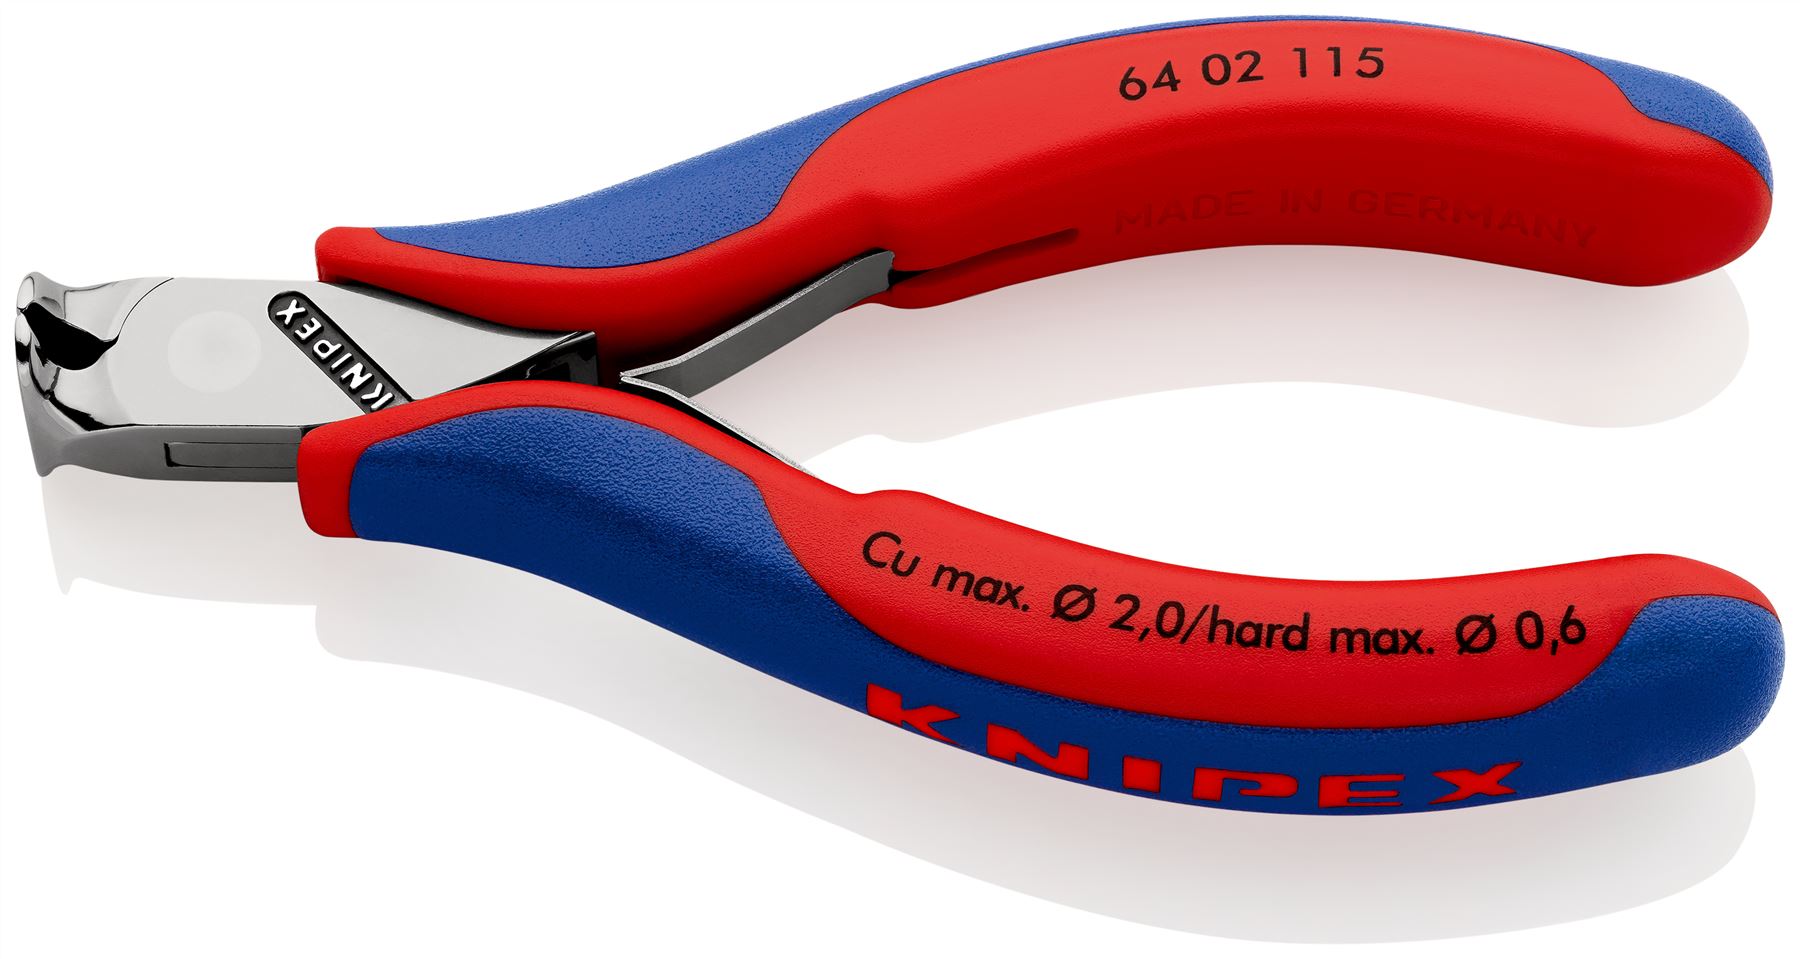 KNIPEX Precision Electronics End Cutting Nipper Pliers 115mm Multi Component Grips 62 02 115